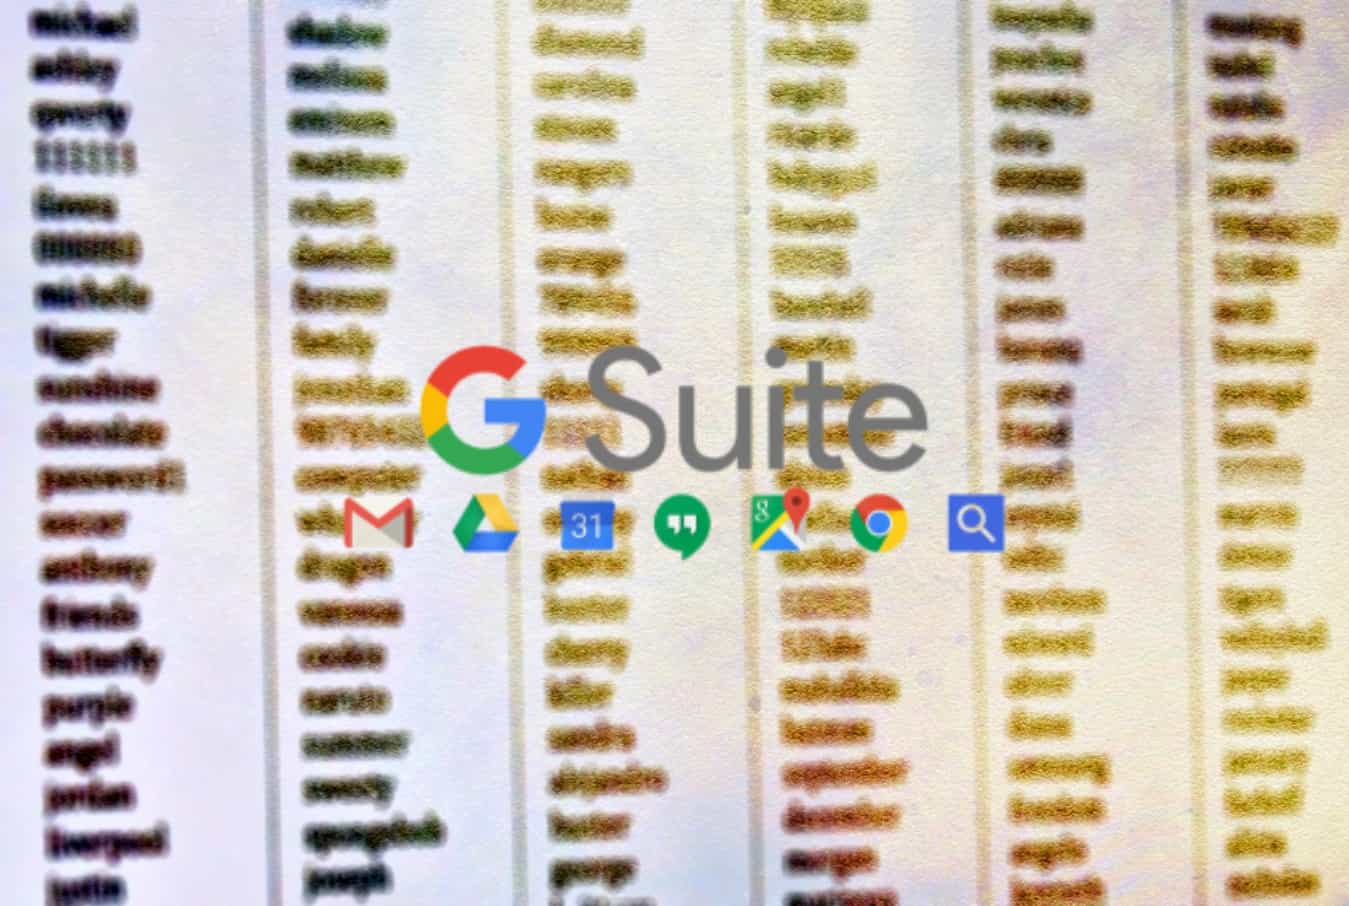 Google says it stored some G Suite passwords in plain text for 14 years